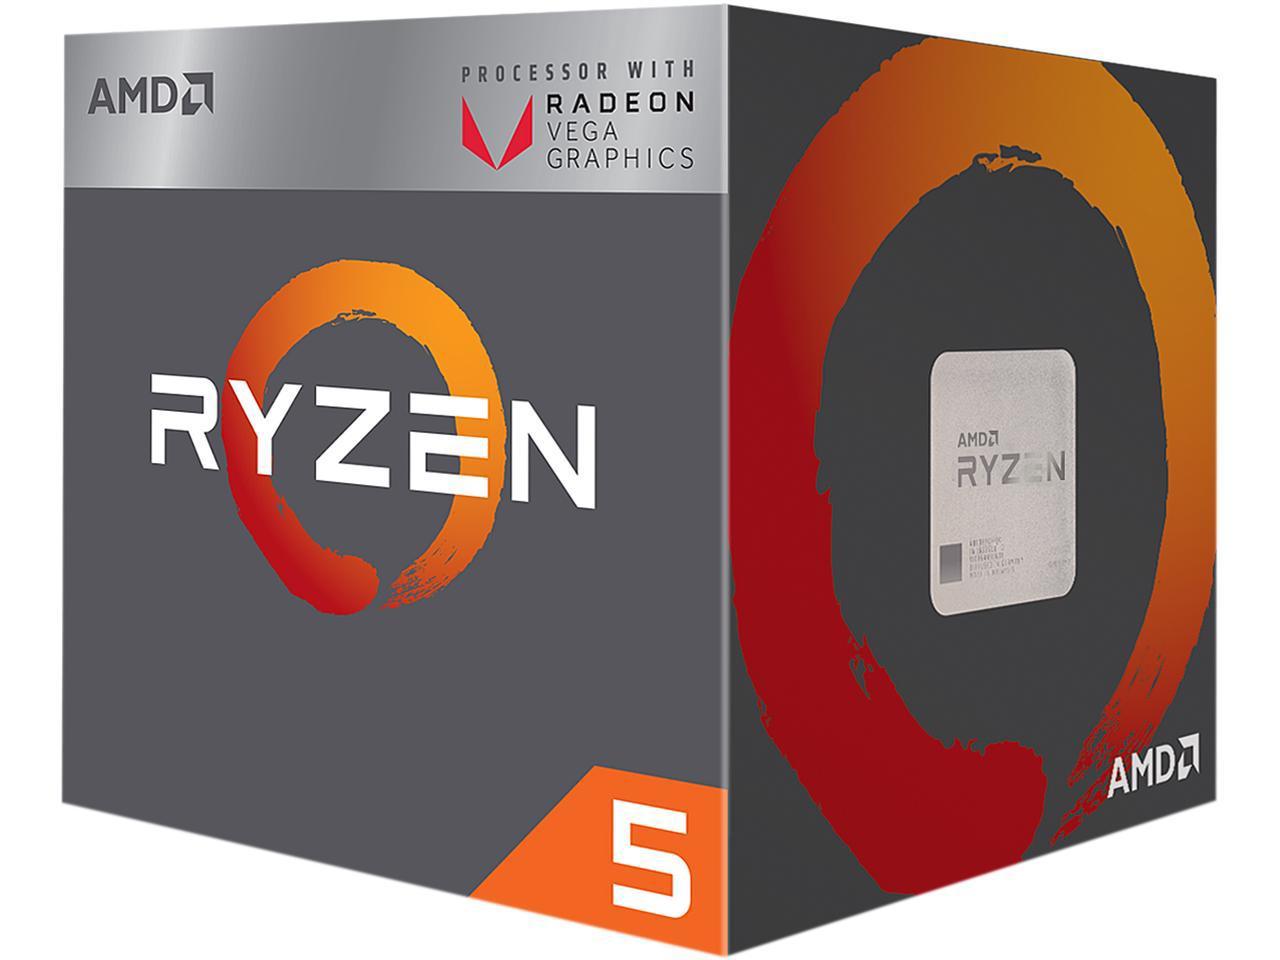 Image for This AMD Ryzen 5 CPU with The Division 2 and World War Z is only $135